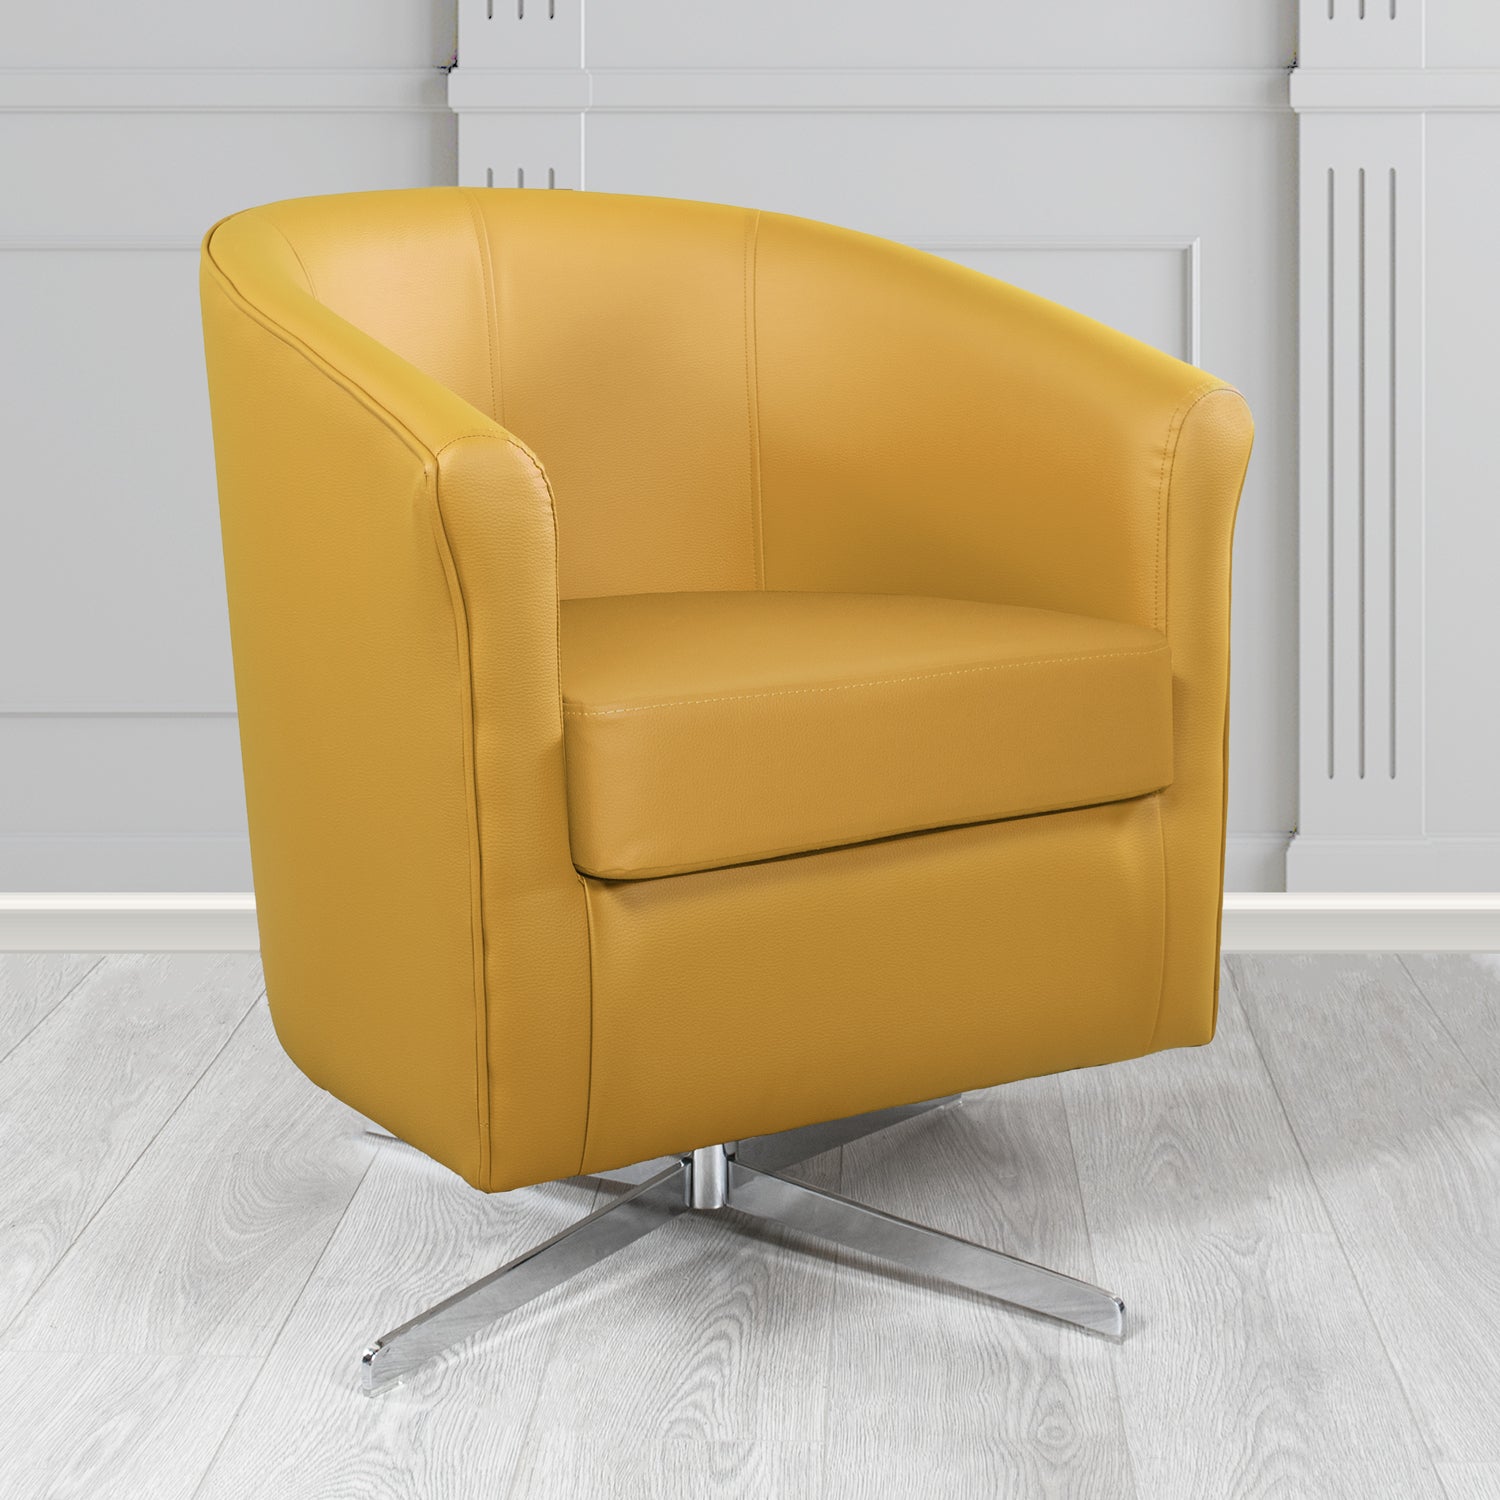 Cannes Swivel Tub Chair in Just Colour Golden Honey Crib 5 Faux Leather - The Tub Chair Shop